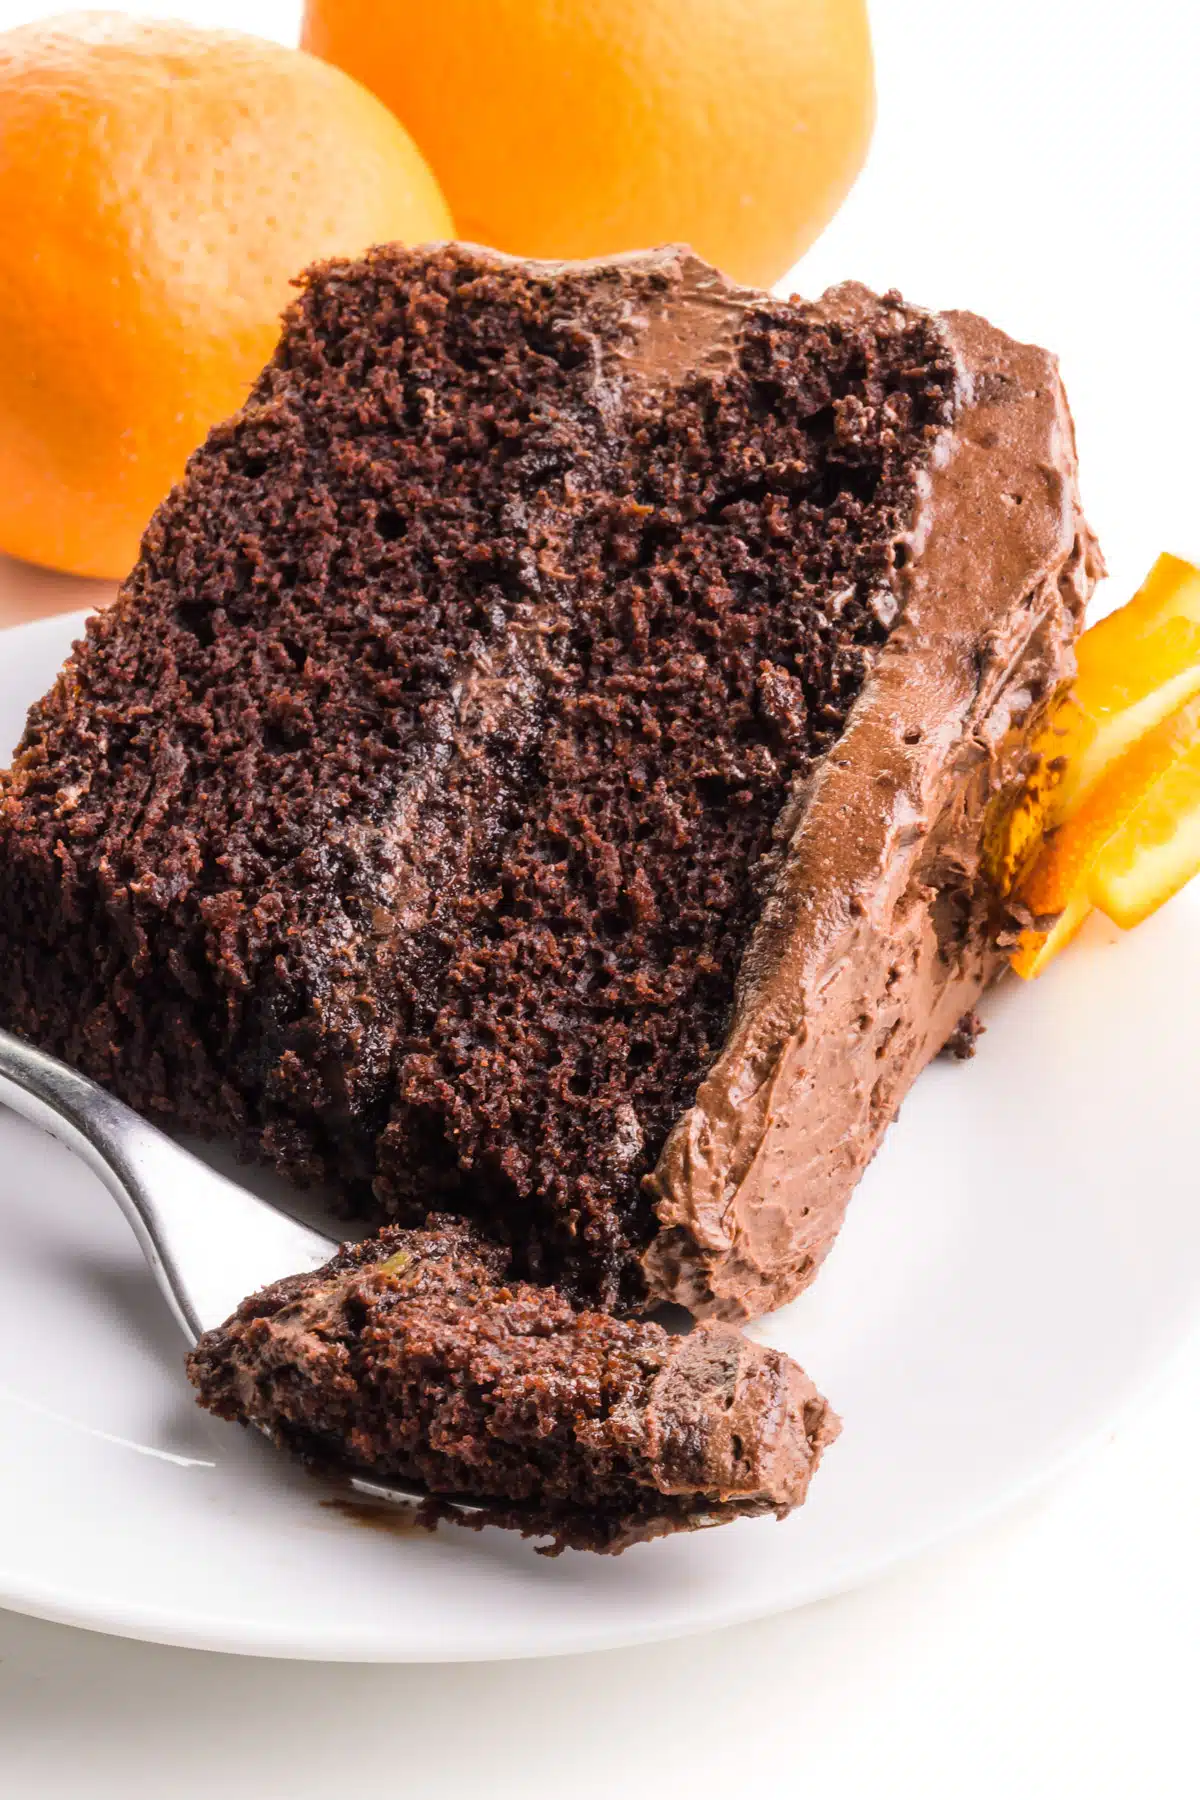 A slice of vegan chocolate orange cake is on its side on a plate. There is a fork with a bite in front of the cake. There are two oranges in the background.